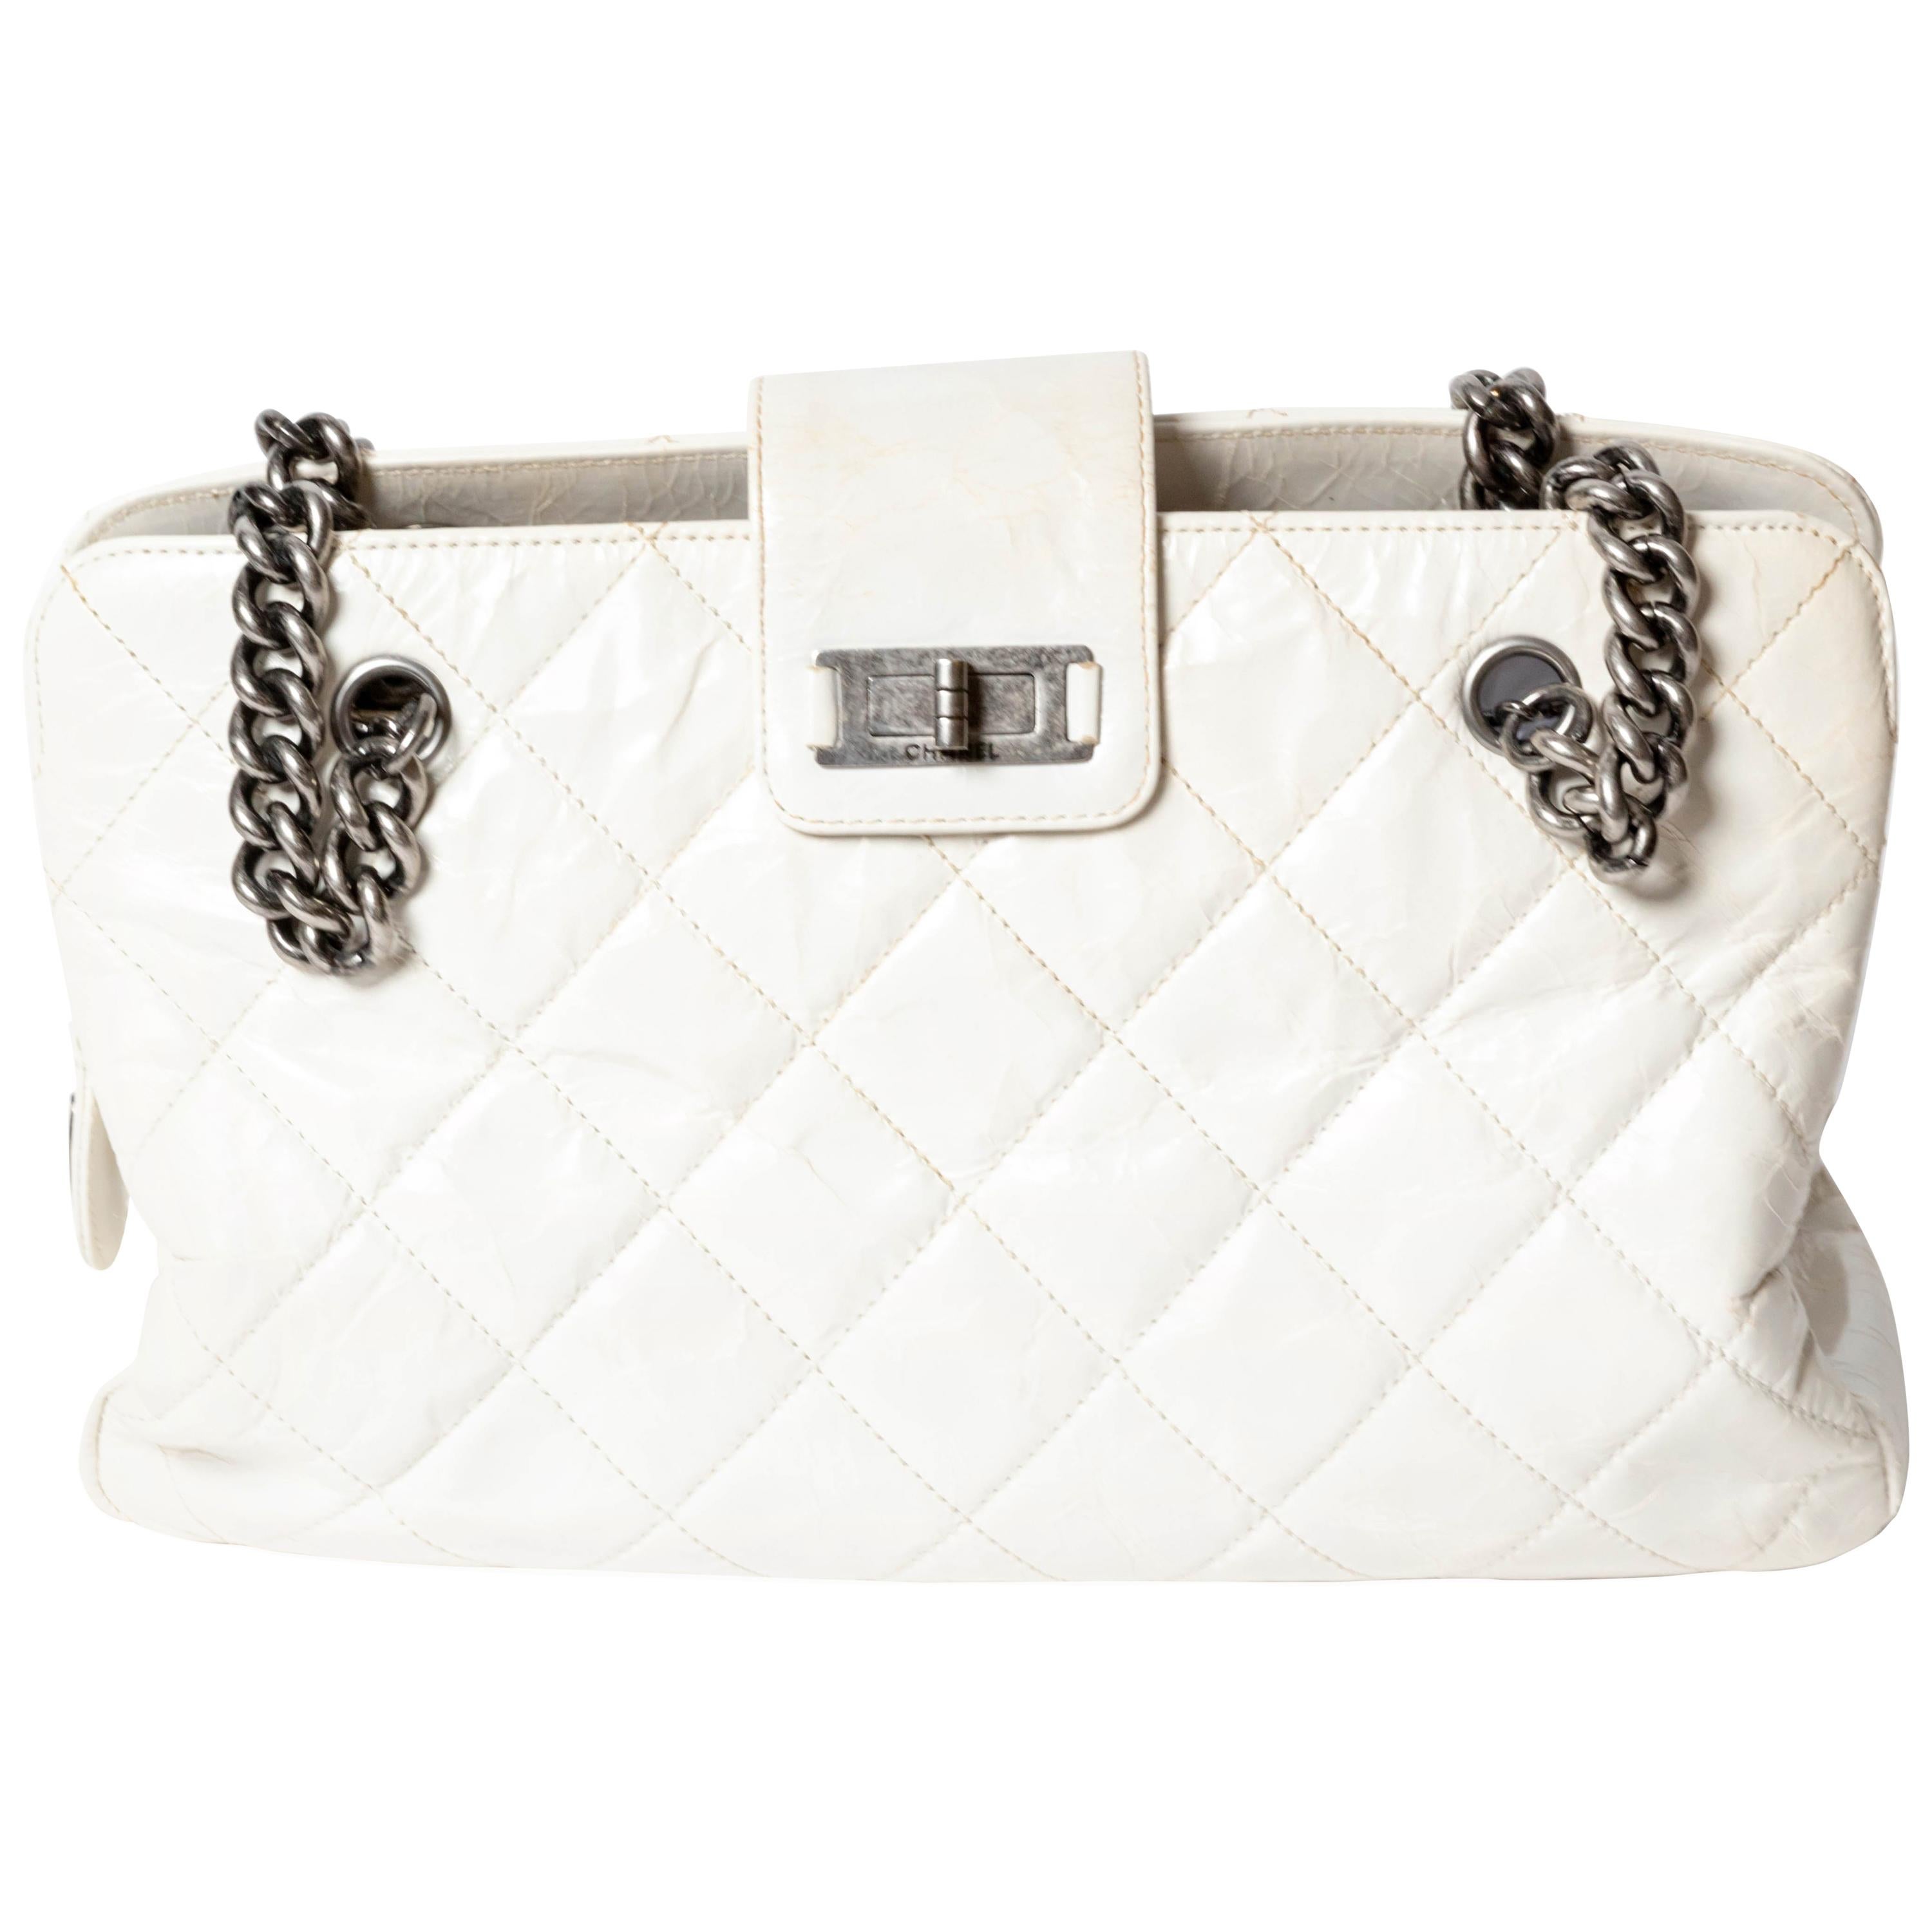 Chanel Reissue Shoulder Bag Tote in White Quilted Leather with Silver HW